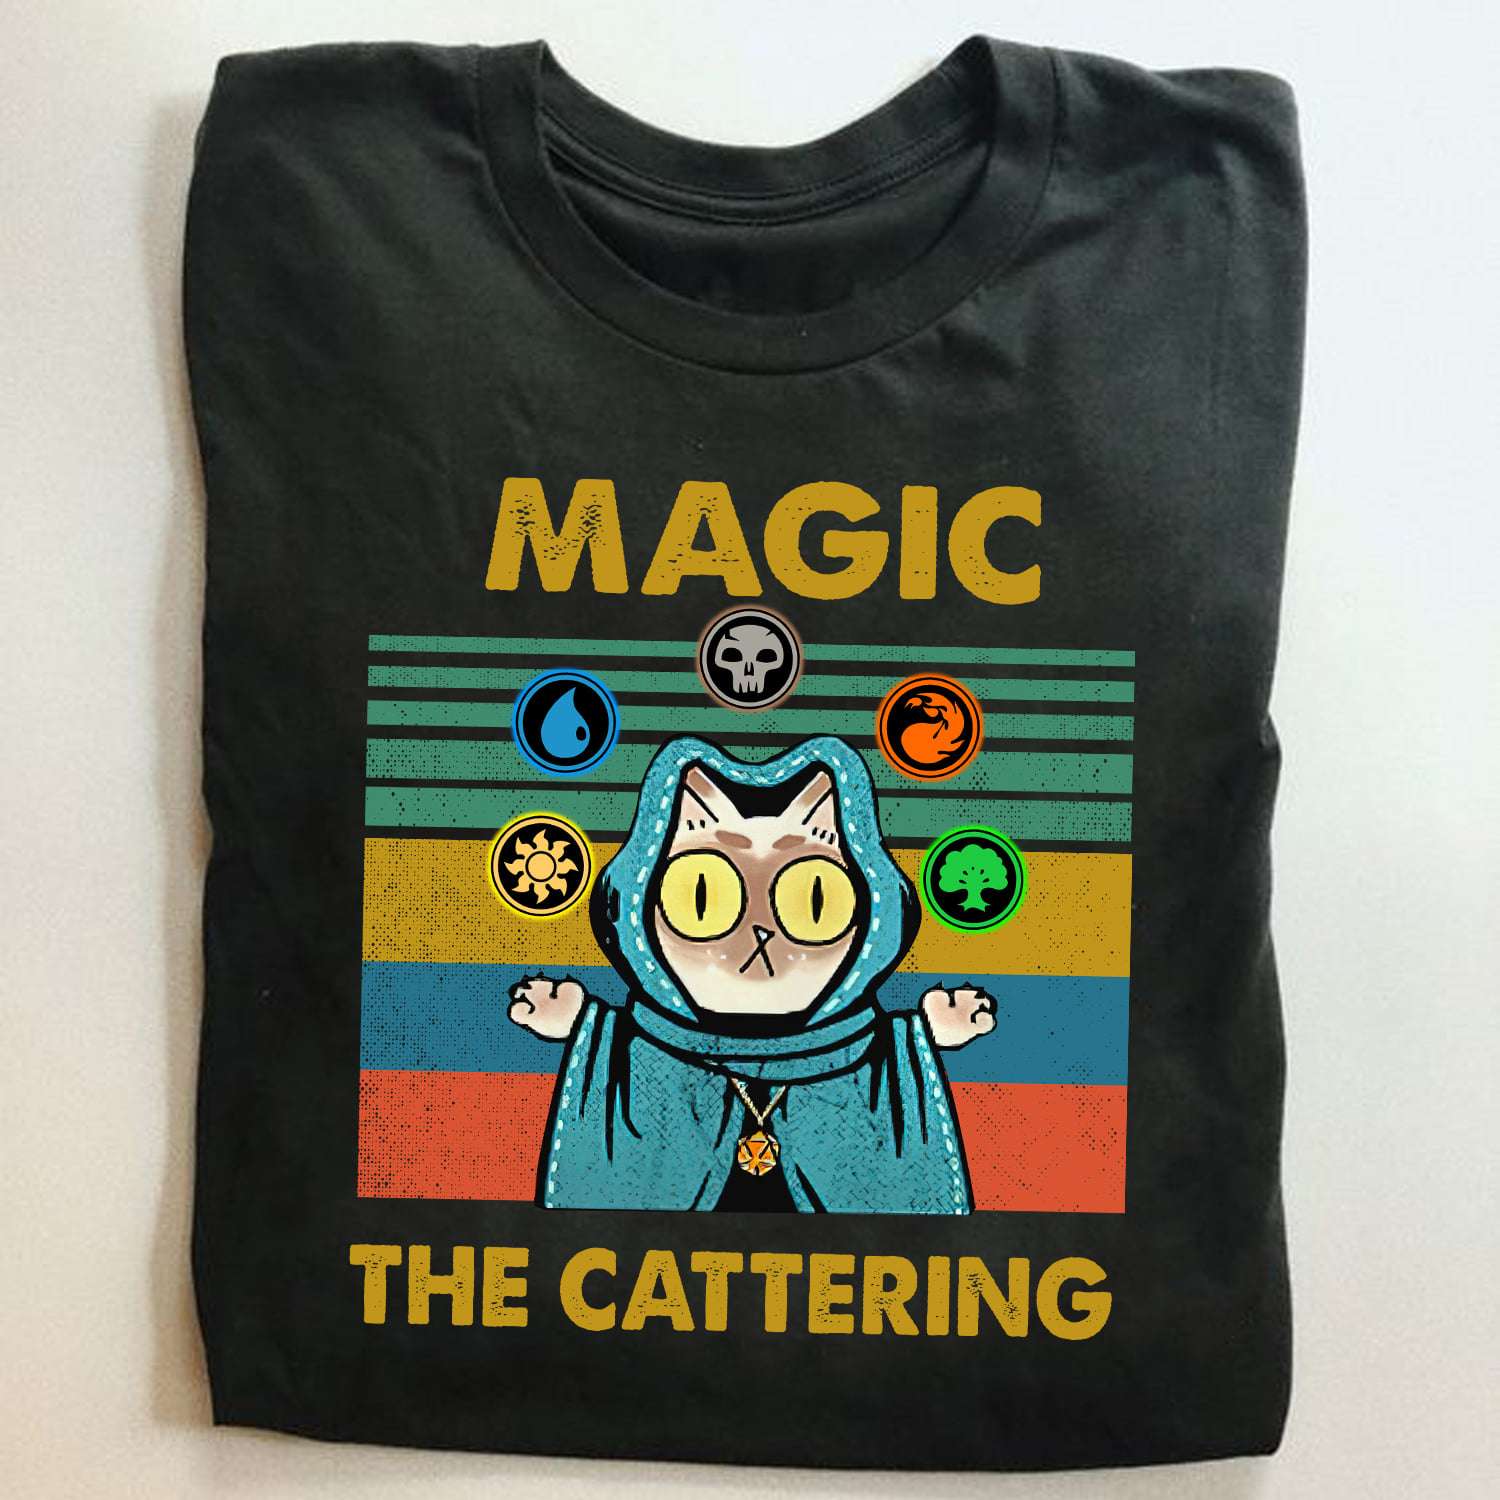 Magic the cattering - Magical witch cat, cat and elements